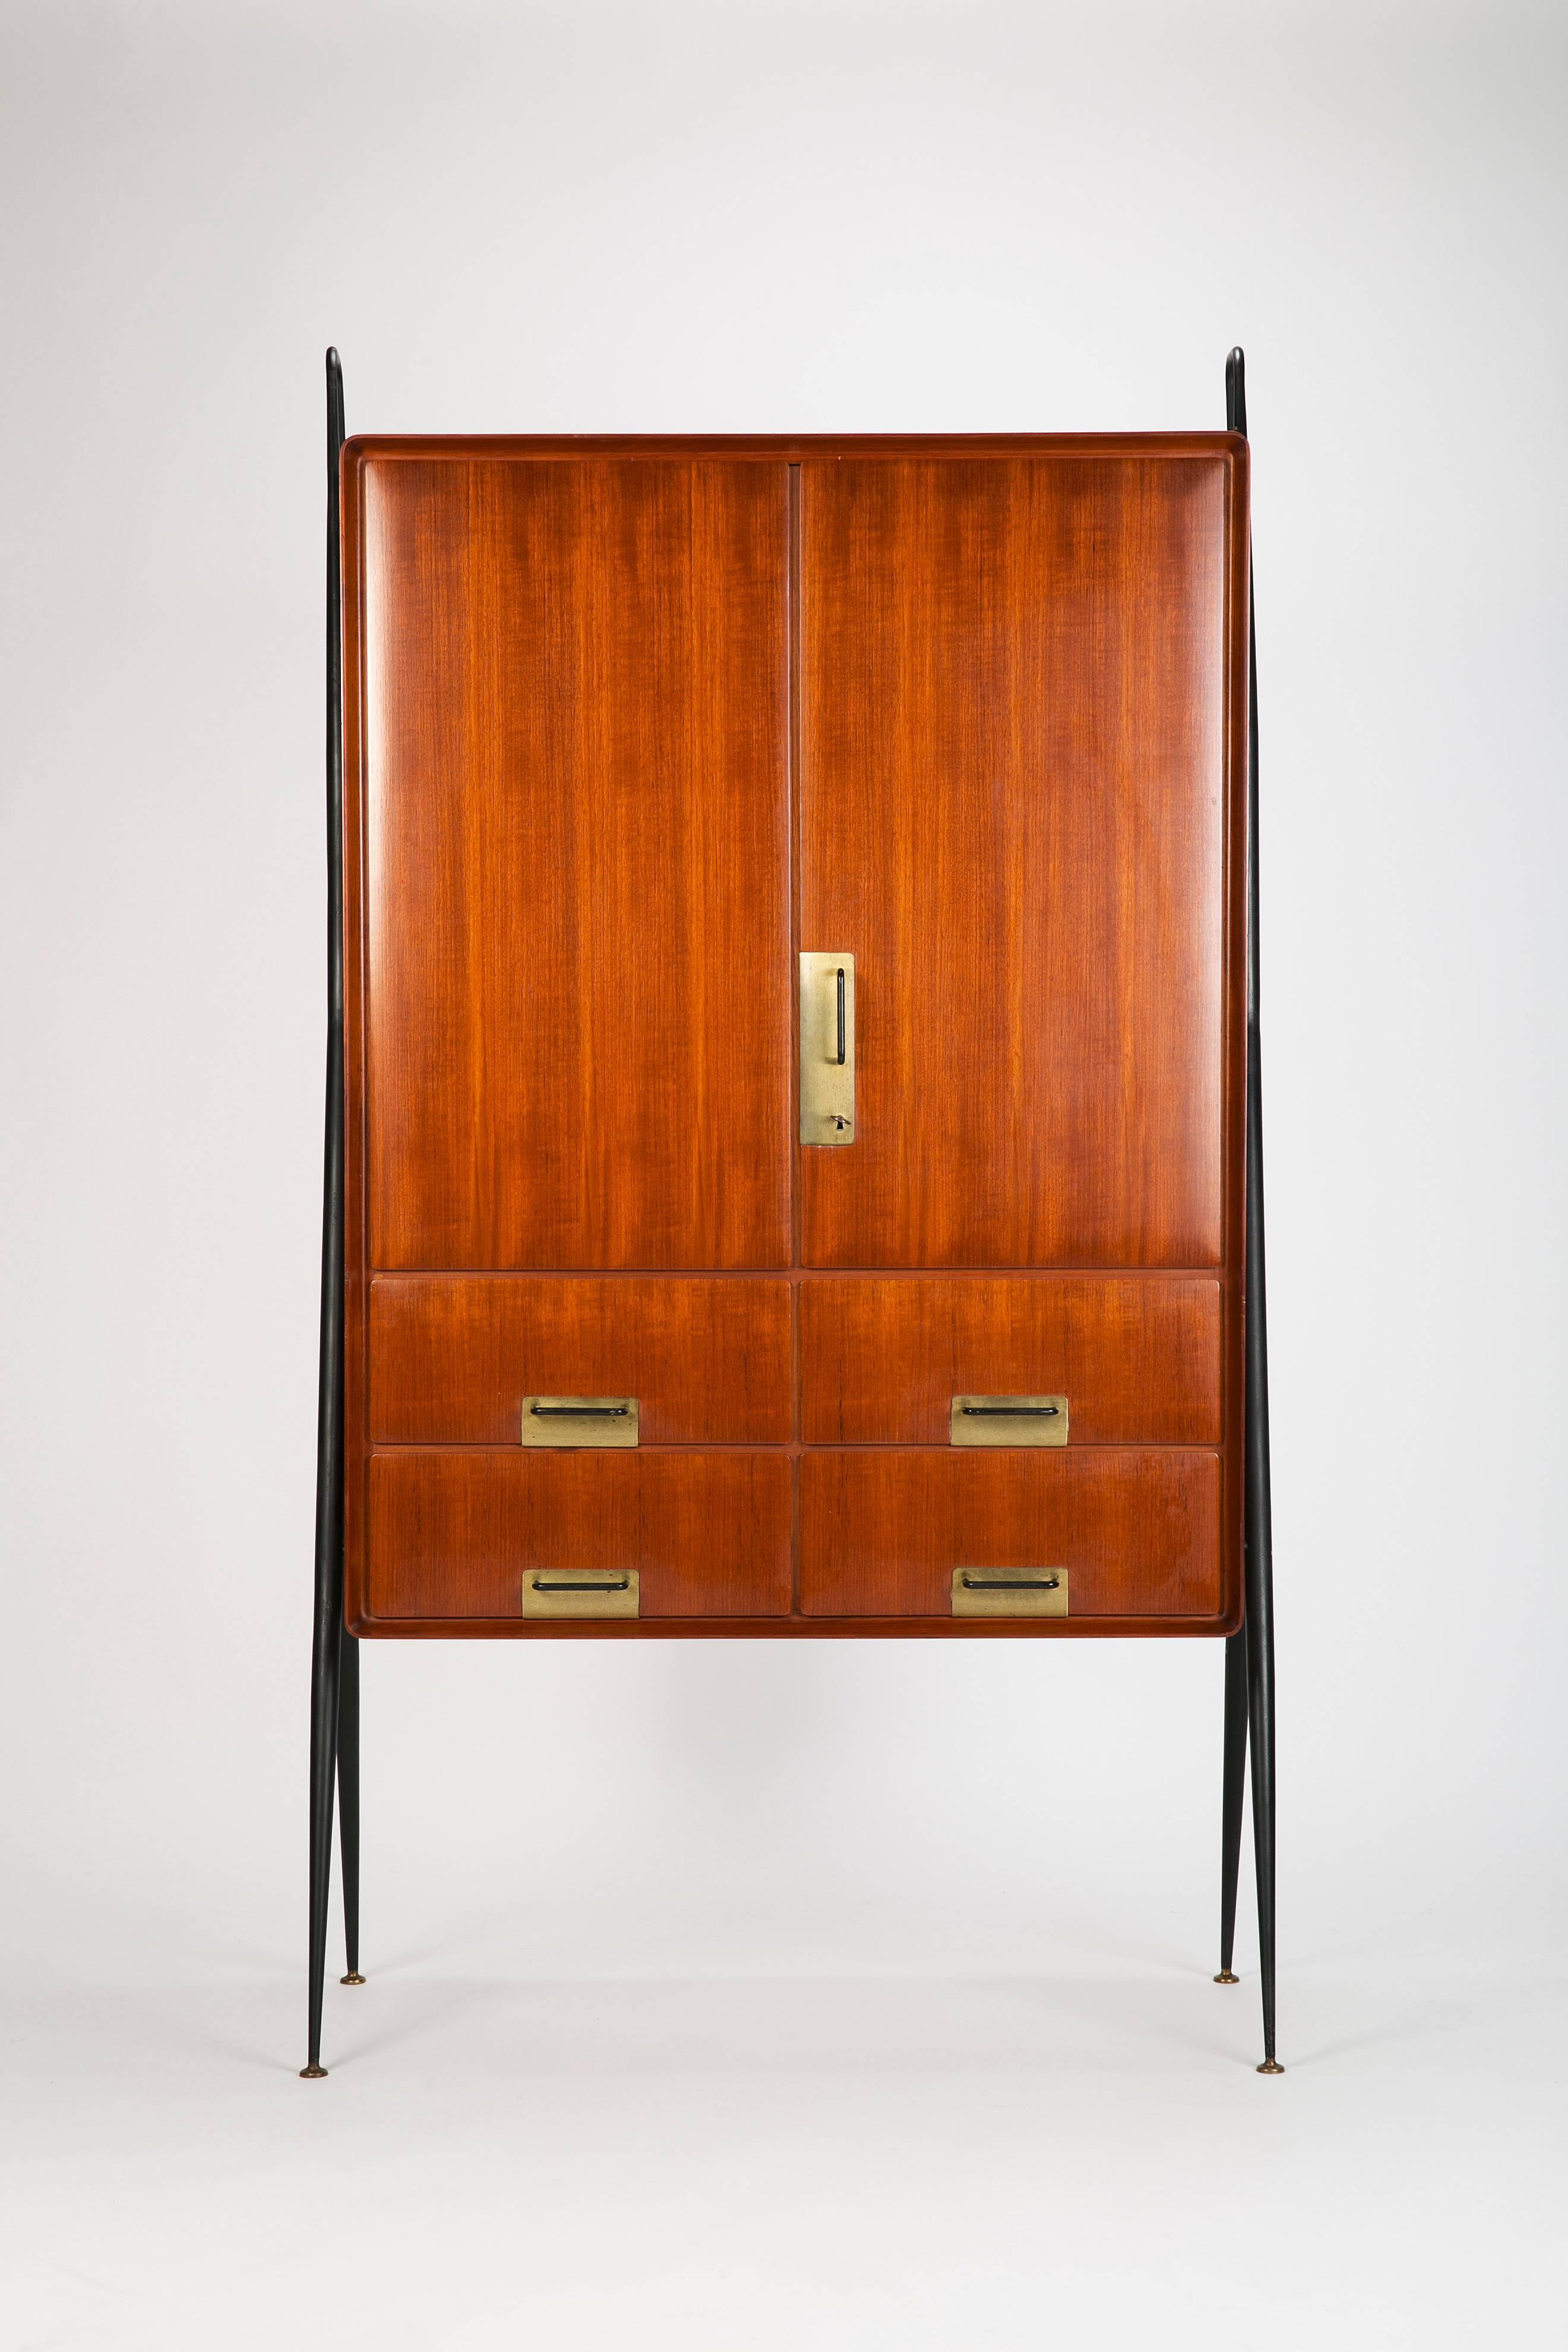 Stunning and rare highboard by Silvio Cavatorta, manufactured in Italy in the 1950s. High quality craftsmanship made of a lacquered steel tube frame with brass feet, body is made of a warm mahogany with an interior of birch. Wonderful brass details.